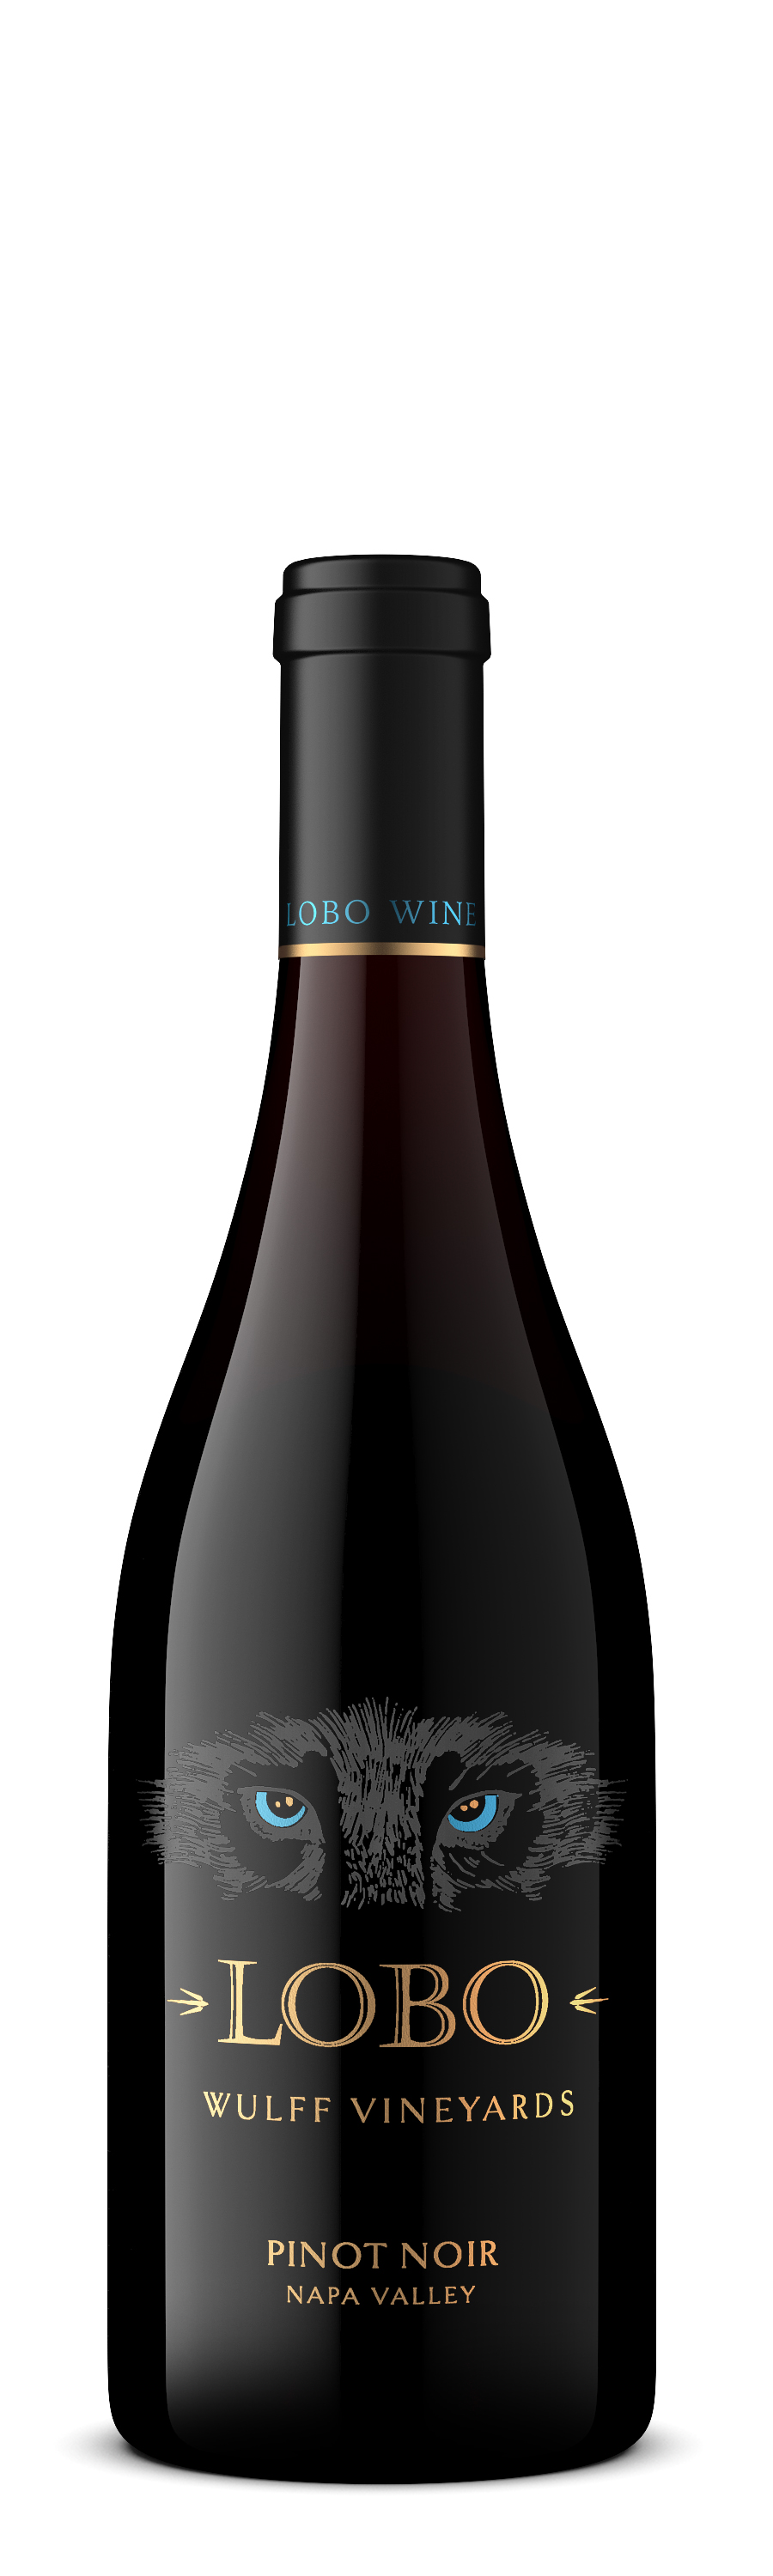 Product Image for 2020 Pinot Noir